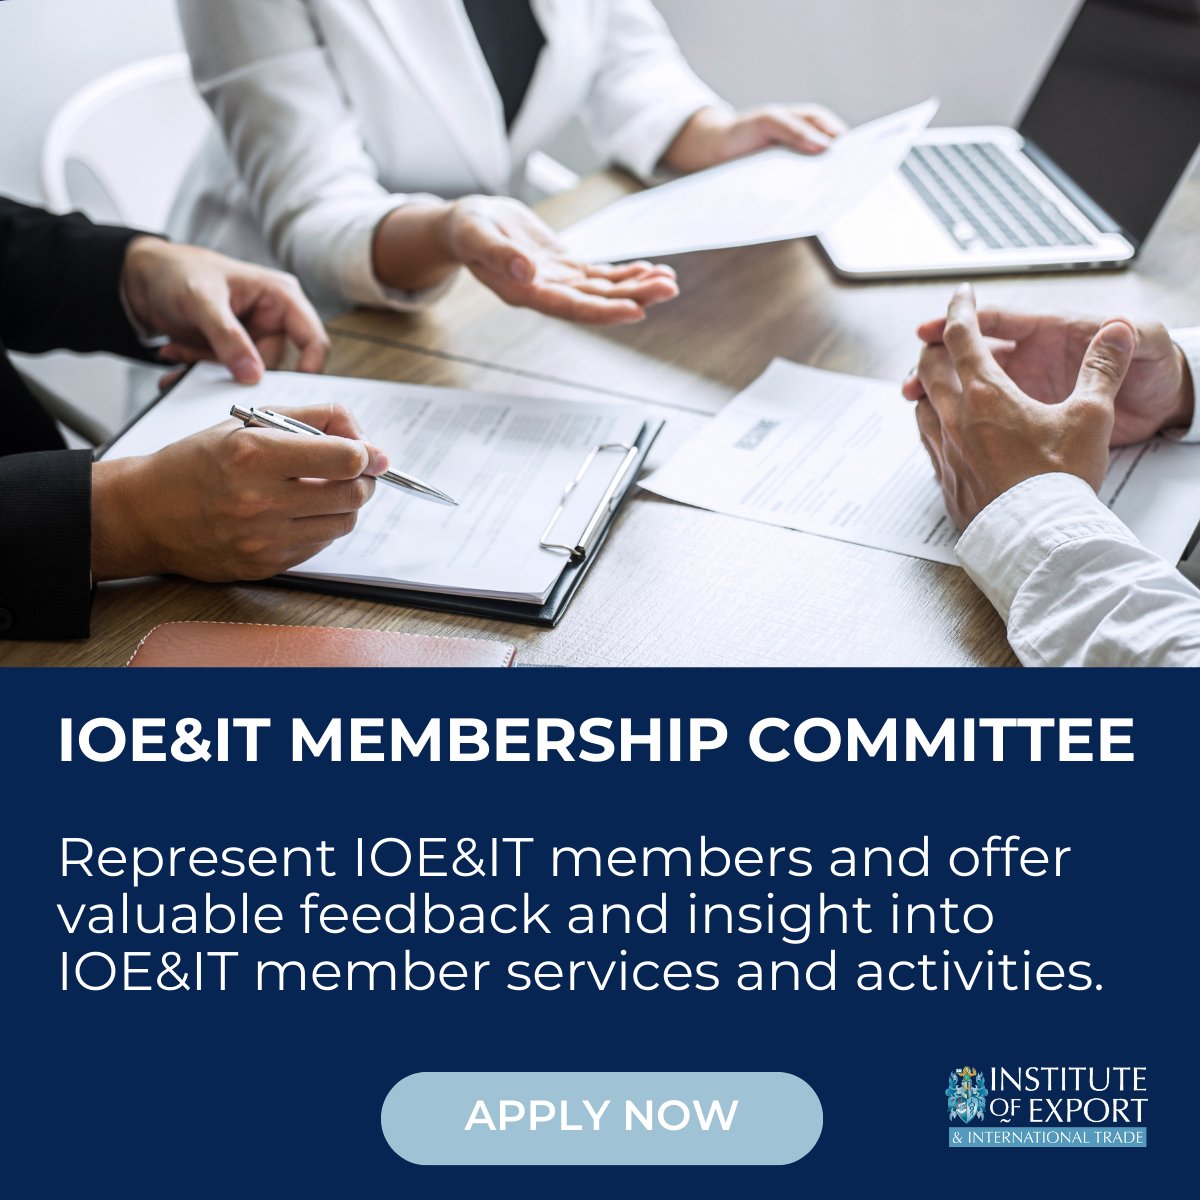 📢 We are now inviting applications from existing @IOExport members interested in joining our #Membership Committee, which will represent members in providing feedback on member services and activities 📅 Applications close on 31 May 2024. Apply here 👉ow.ly/Uver50RvCzj